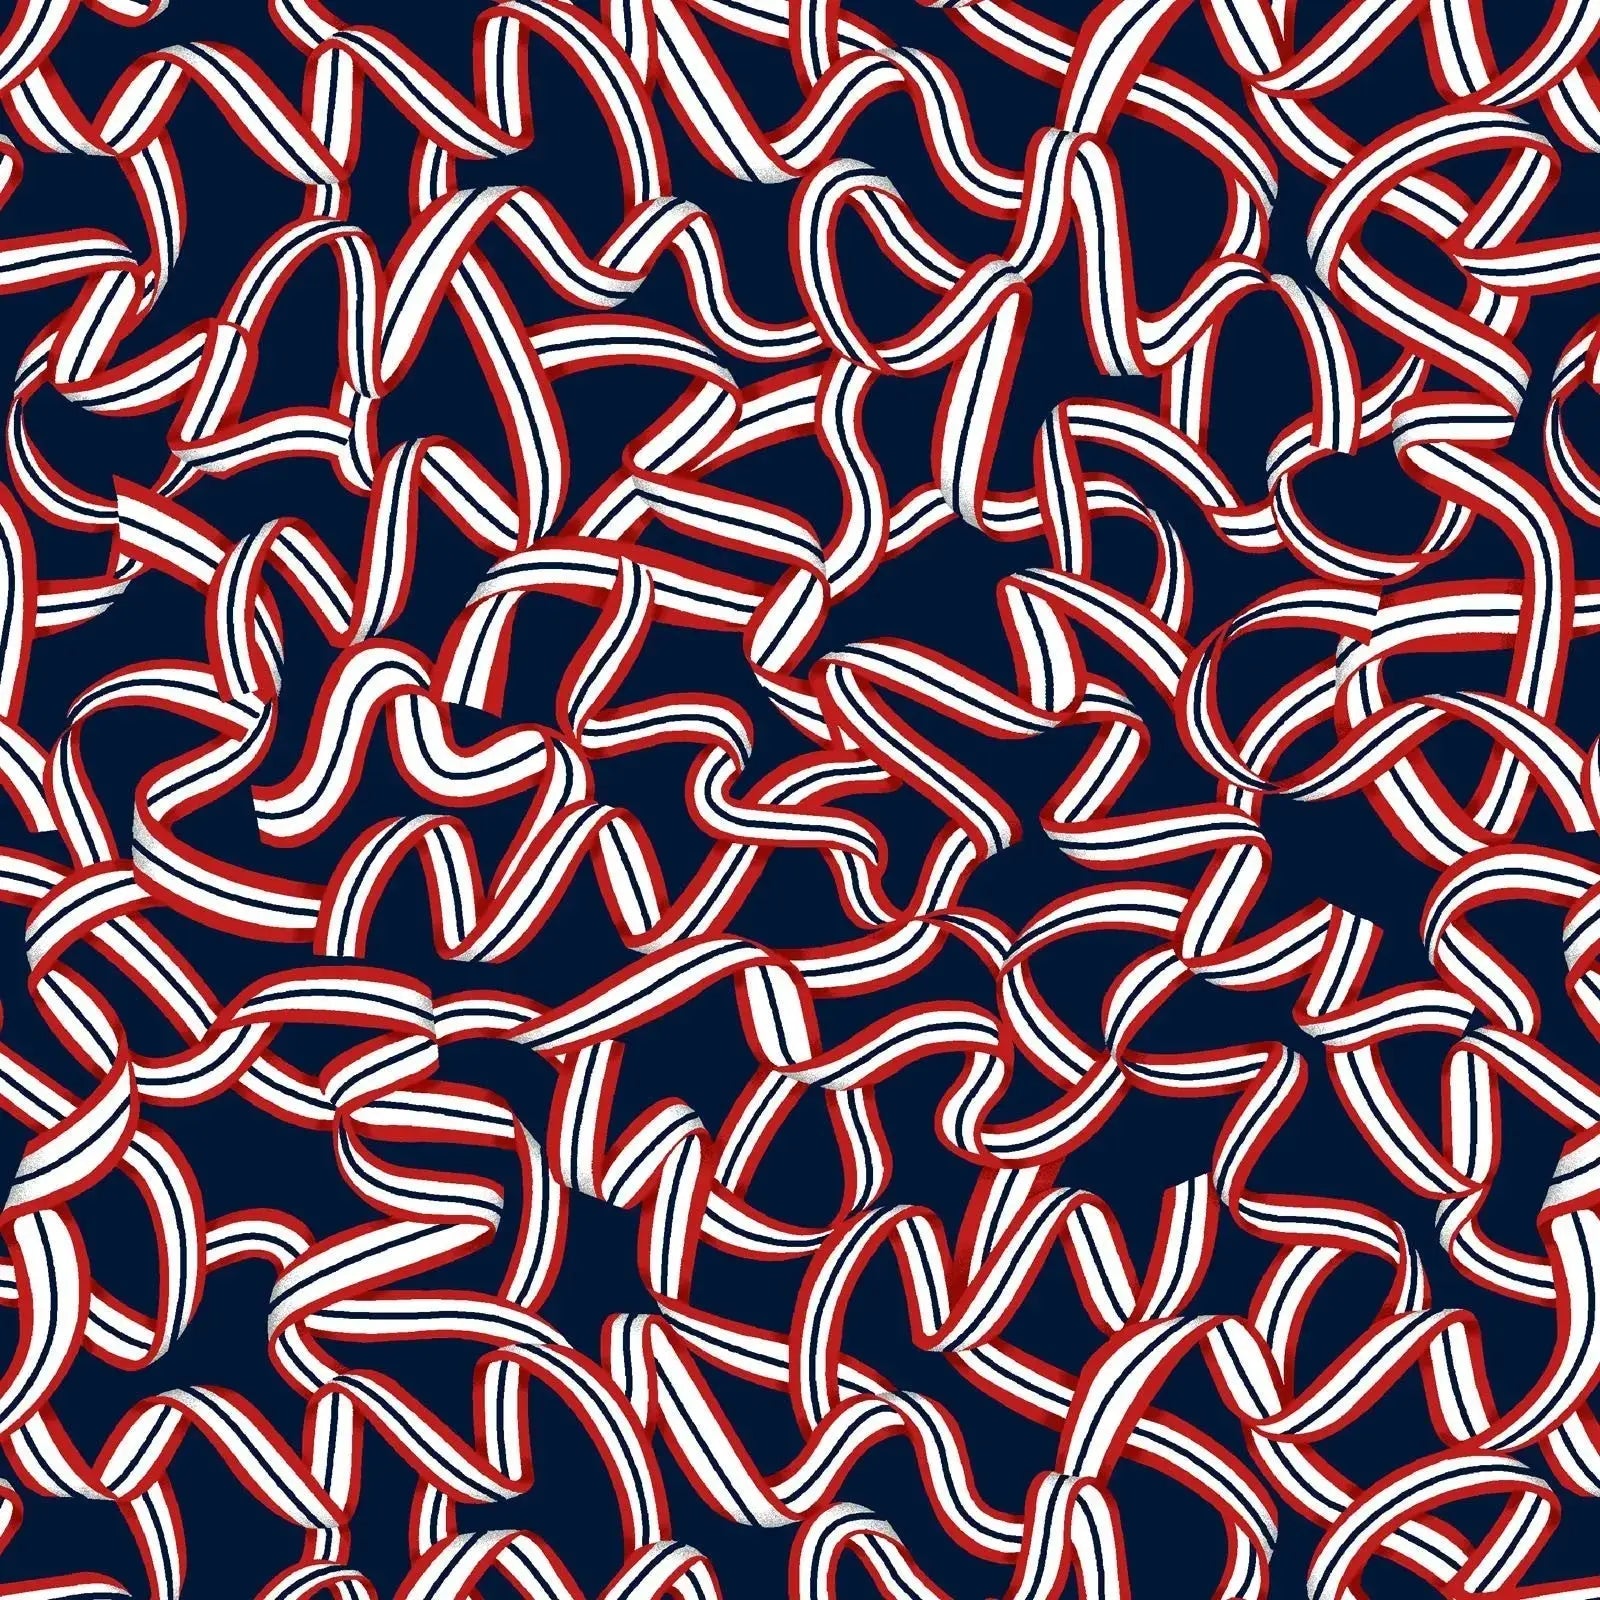 Red White and Starry Blue Too Ribbon Cotton Wideback Fabric ( 1 1/4 yard pack )